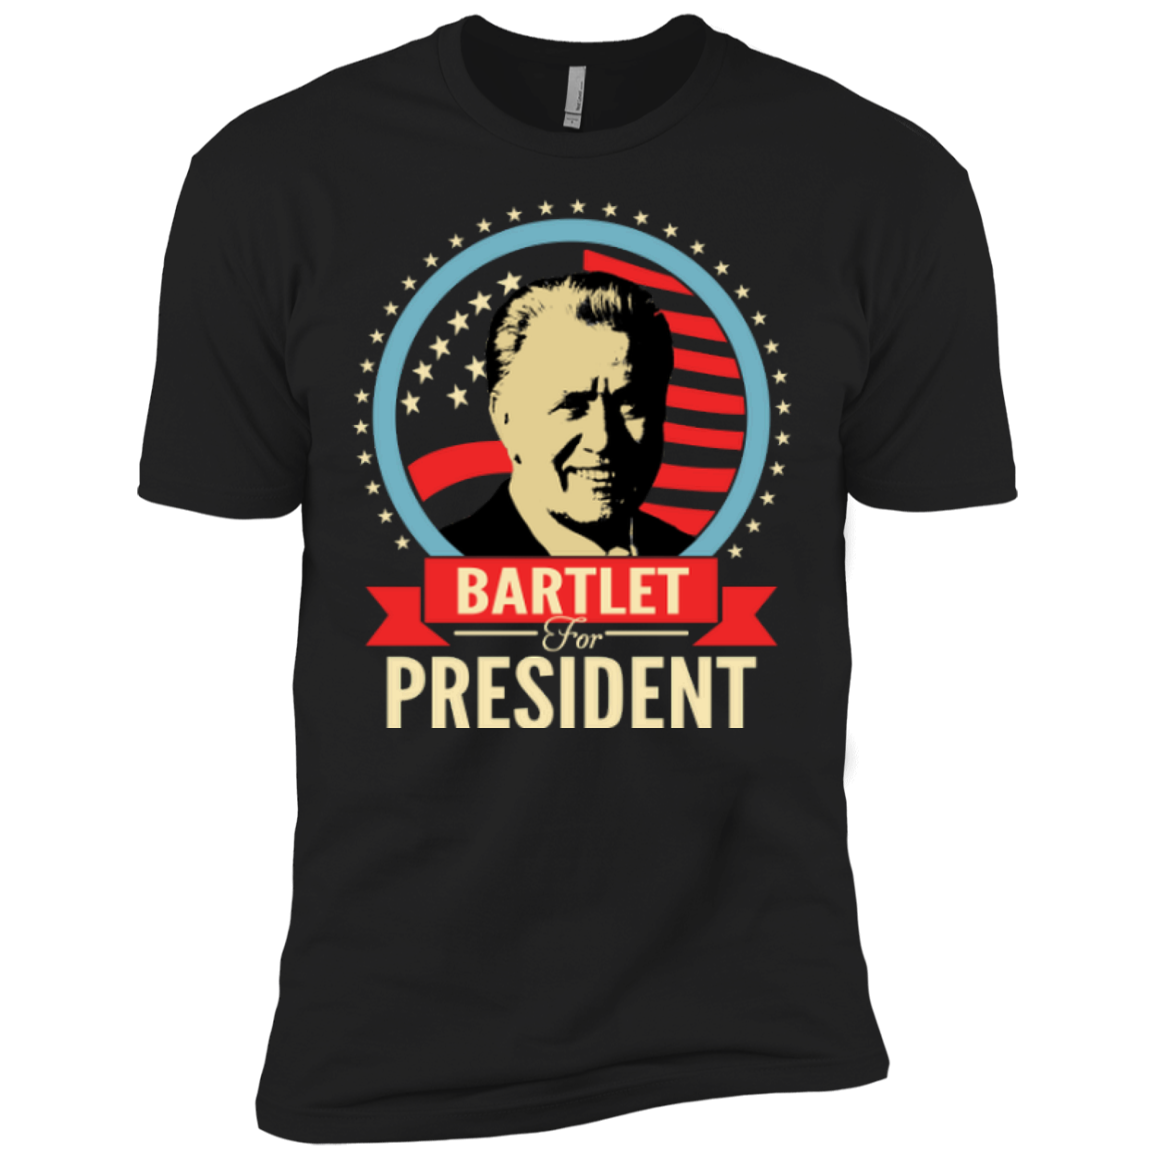 Bartlet For President Shirts/Hoodies/Tanks - ifrogtees